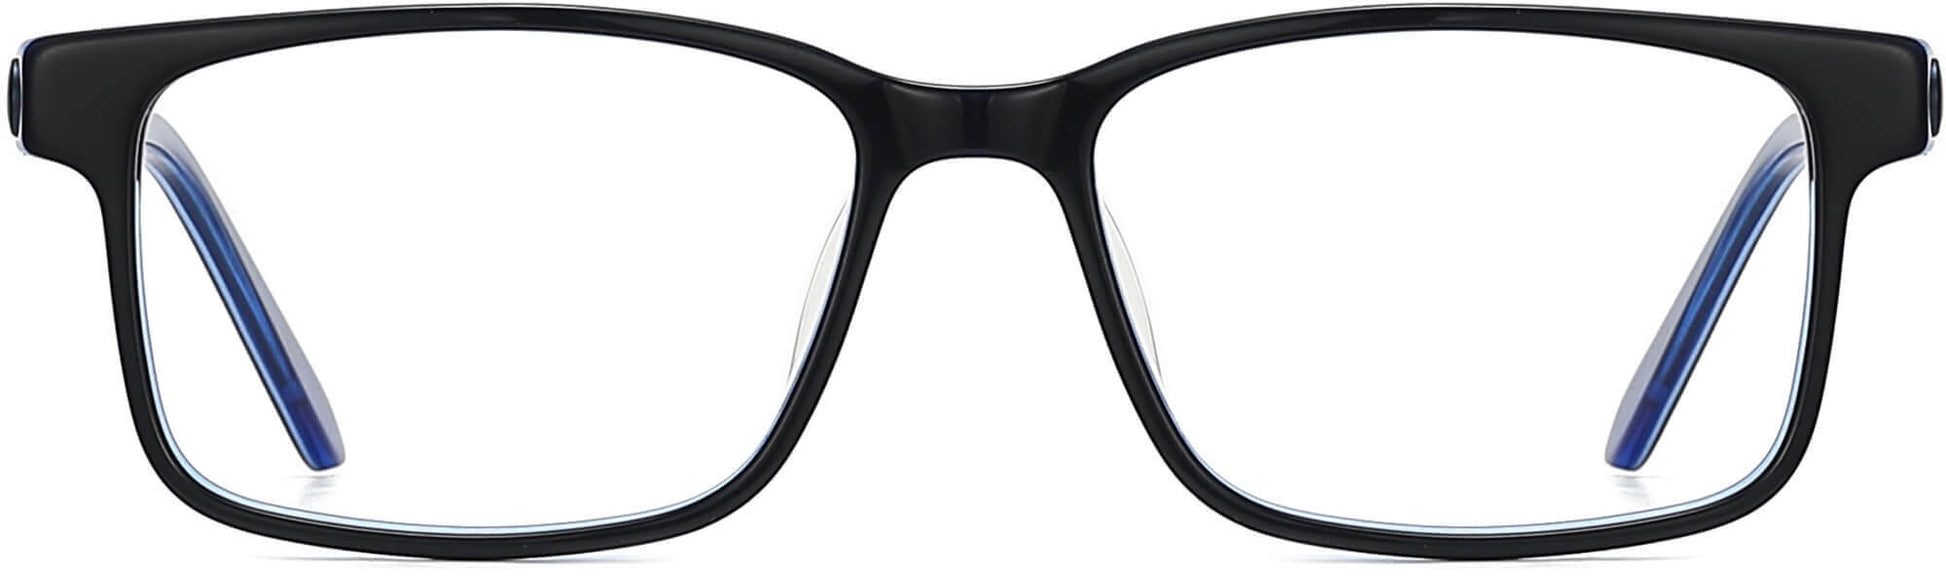 Finnegan Rectangle Blue Eyeglasses from ANRRI, front view